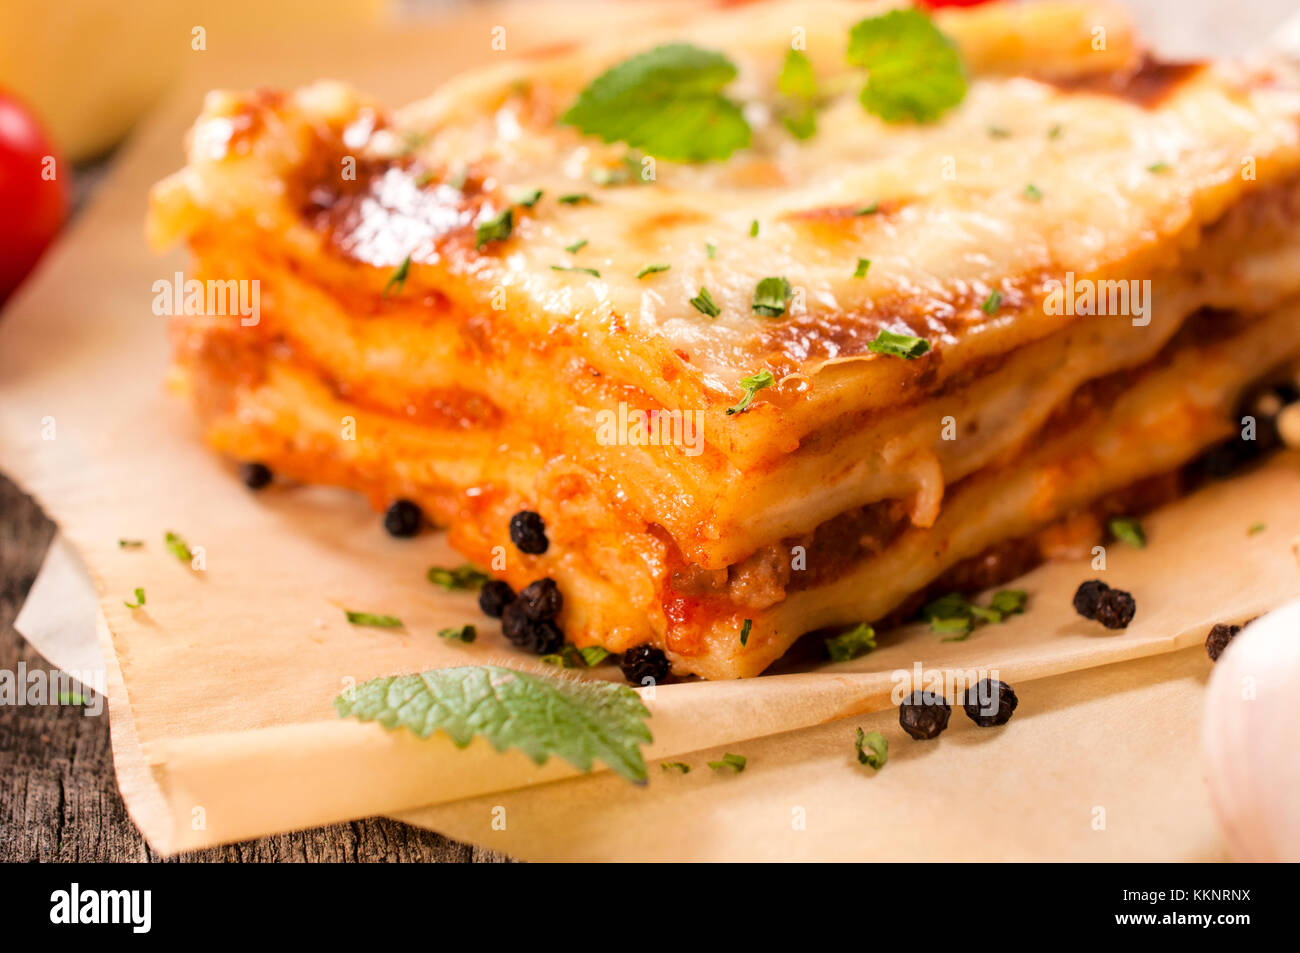 Juicy homemade lasagna with beef meat.Selective focus in the middle of lasagna Stock Photo